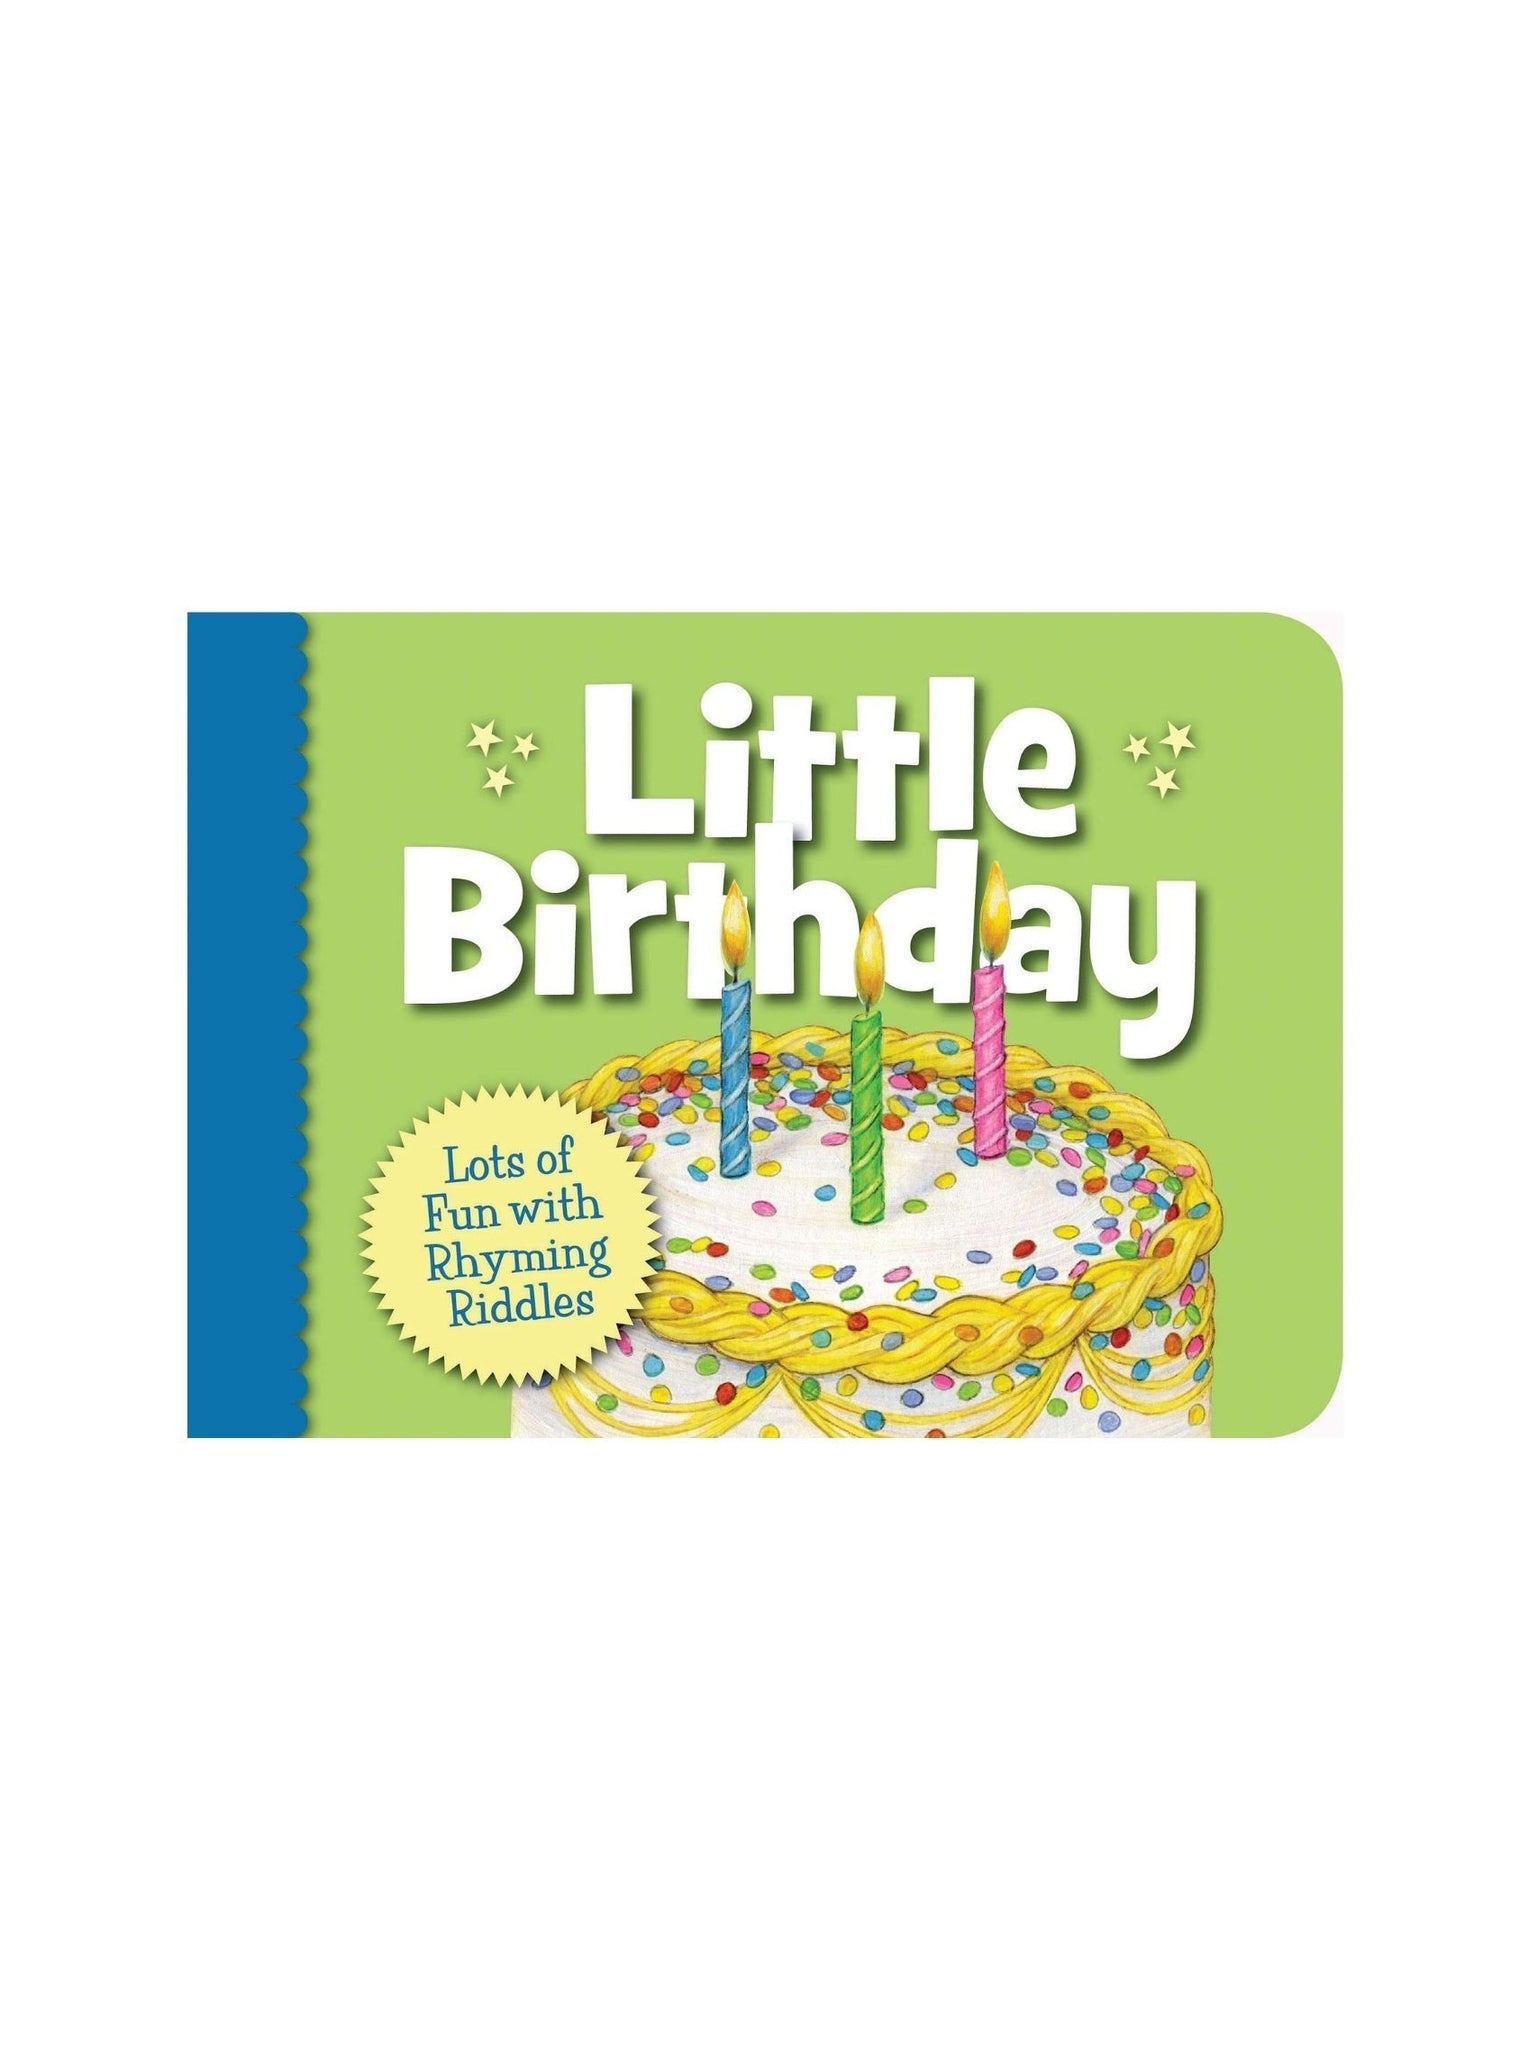 cover is green with white and colorful sprinkled birthday cake with candles